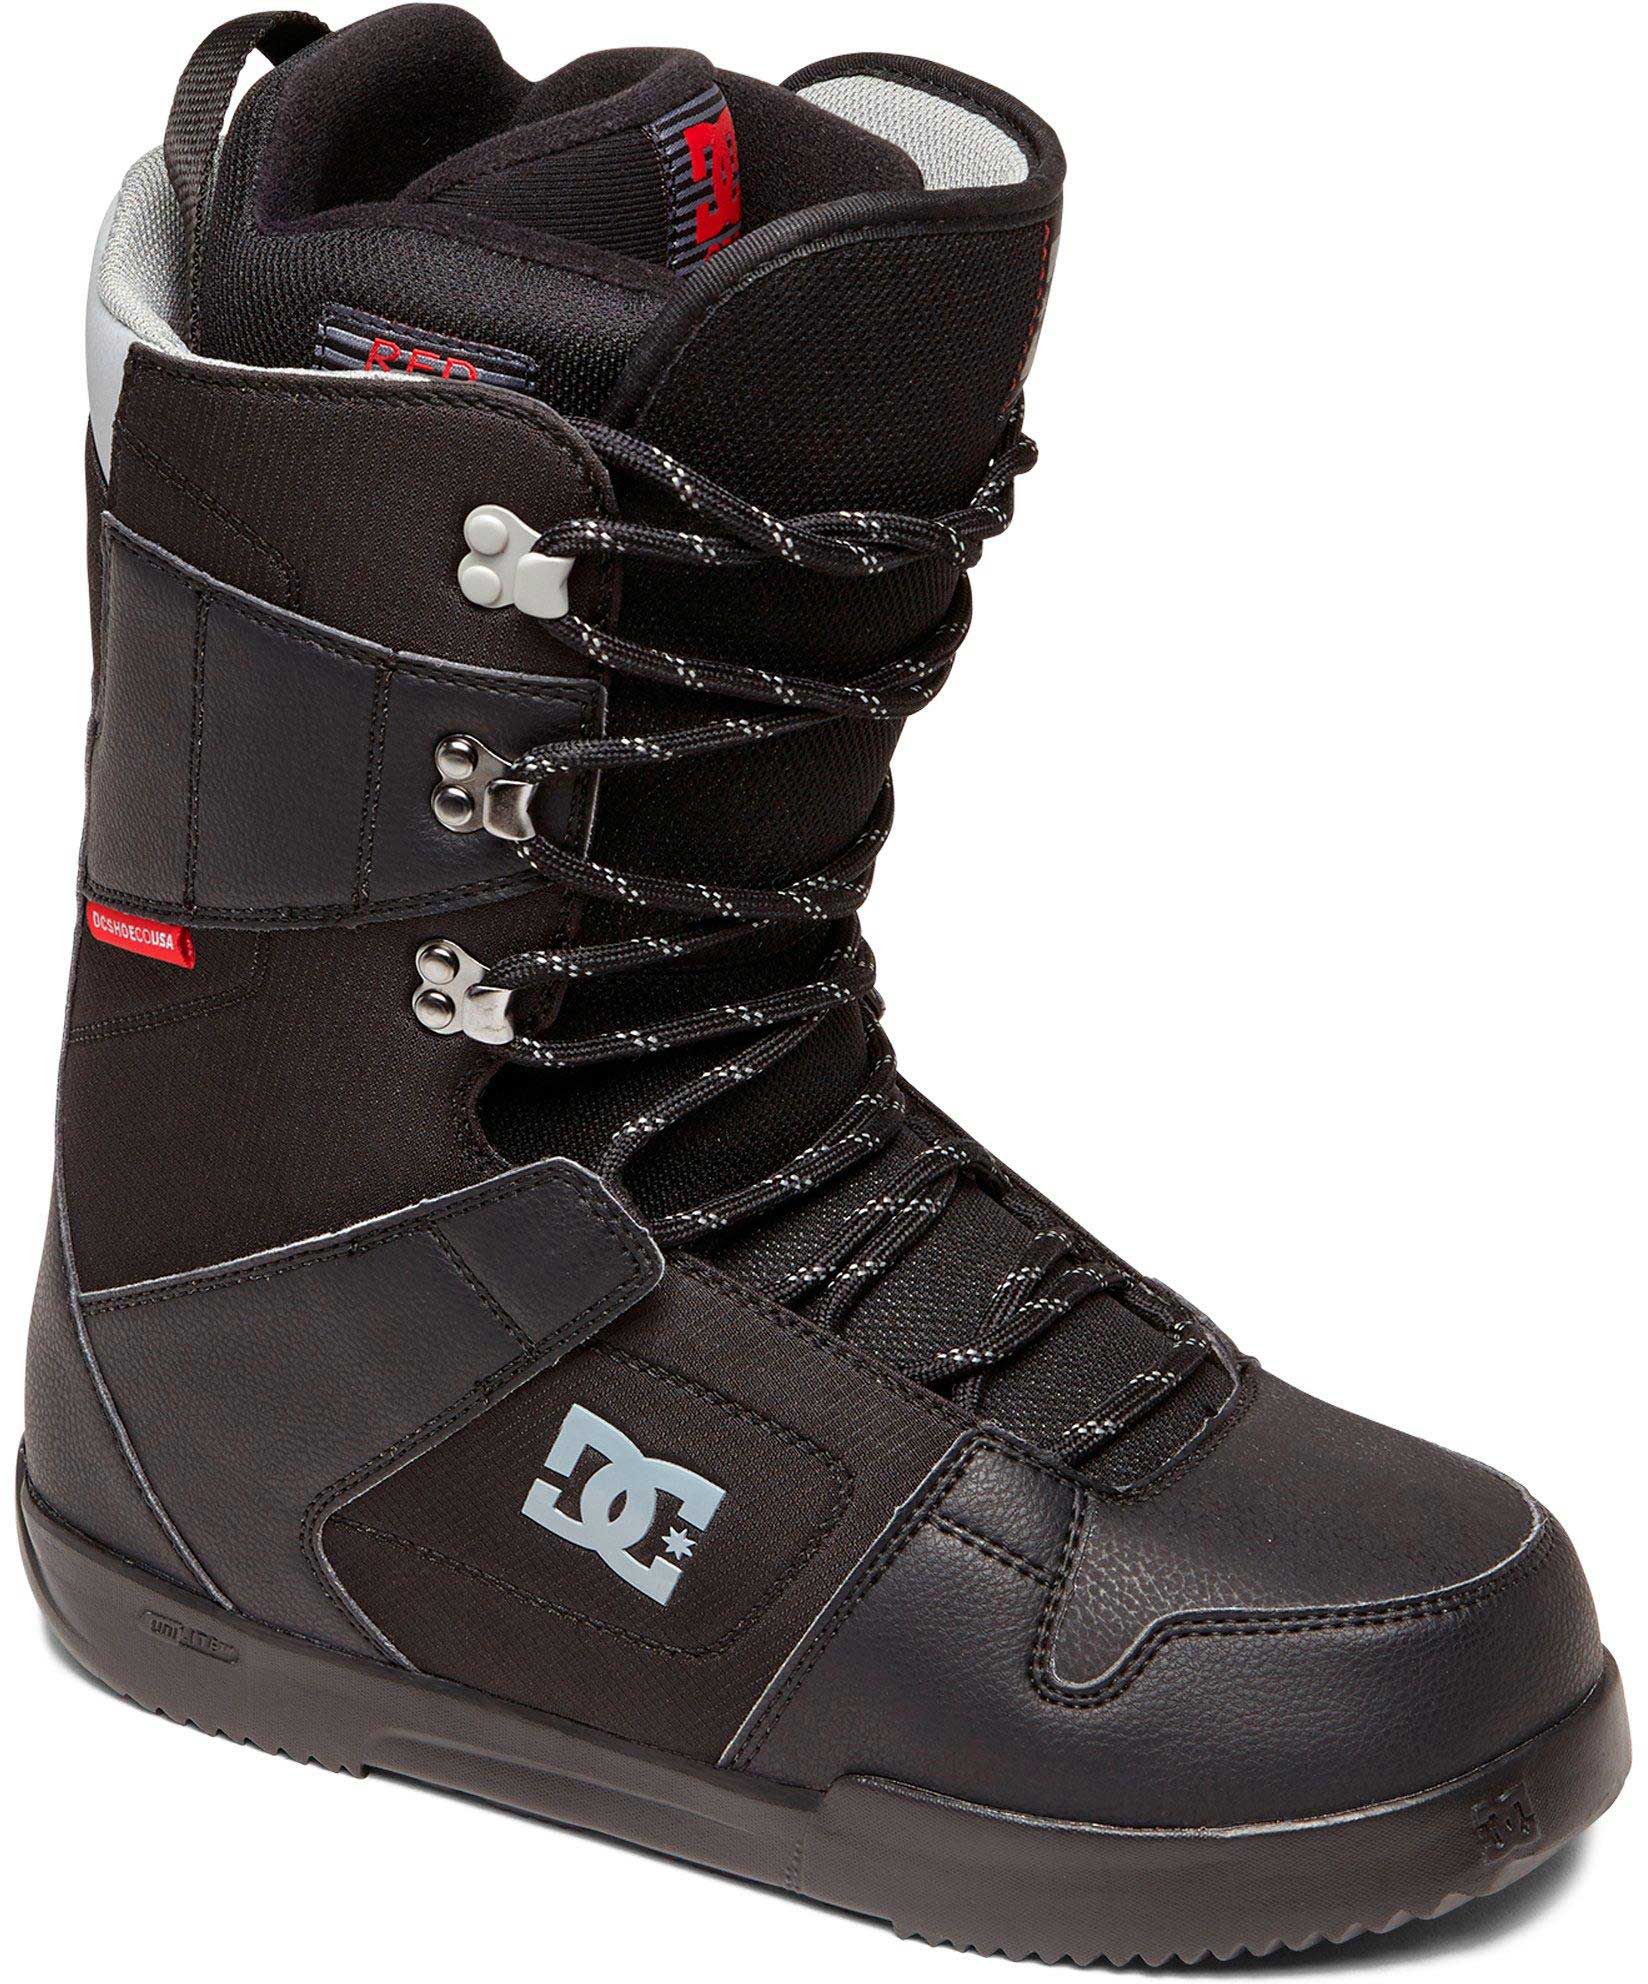 2020 dc snowboard boots